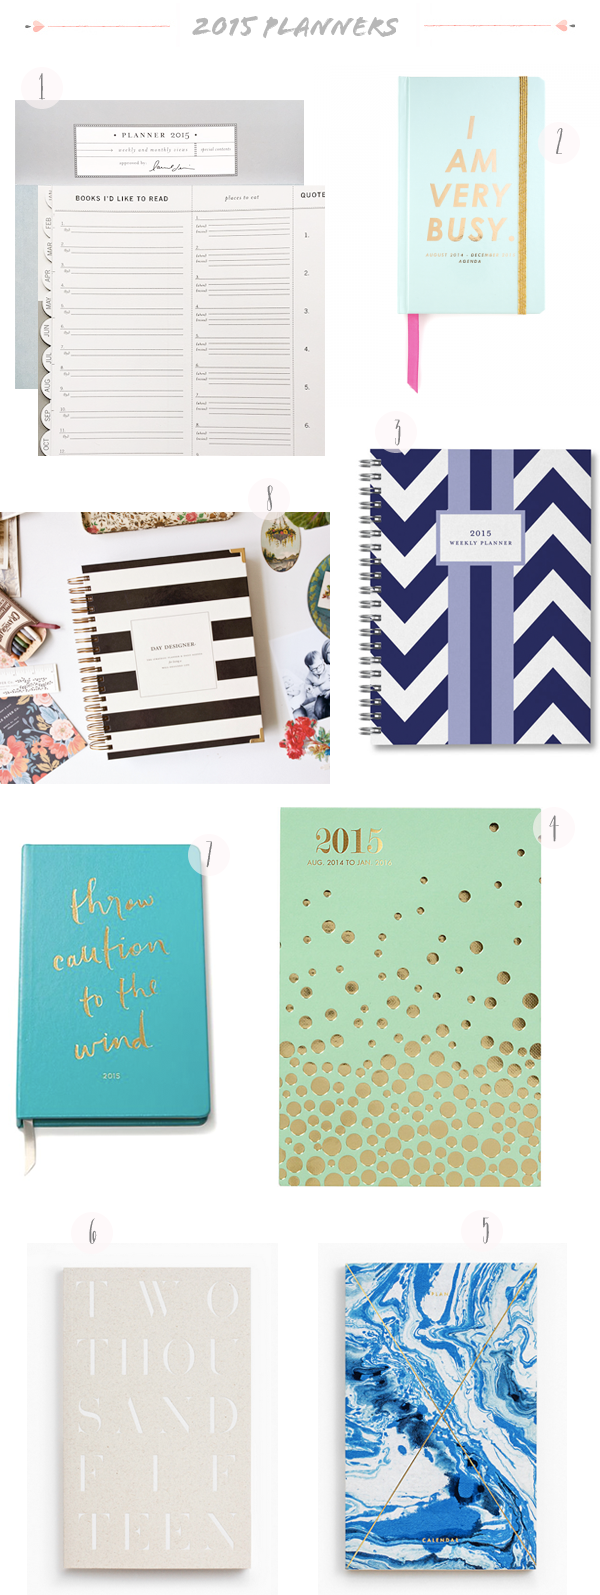 2015 Planner and Agenda Round Up by Oh So Beautiful Paper